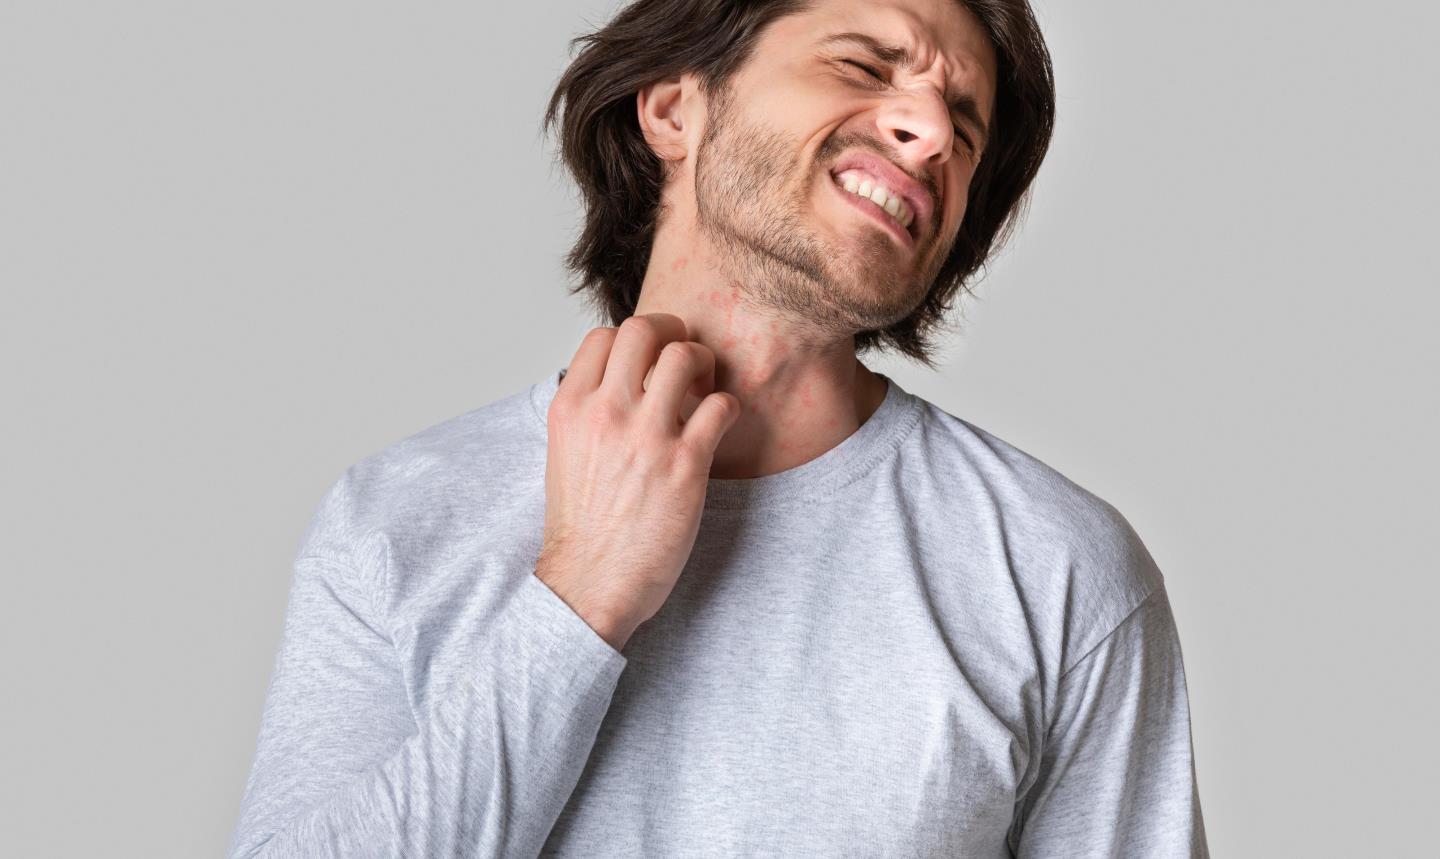 A man scratches his neck. GPs can provide medication to ease some symptoms, such as itchy skin.